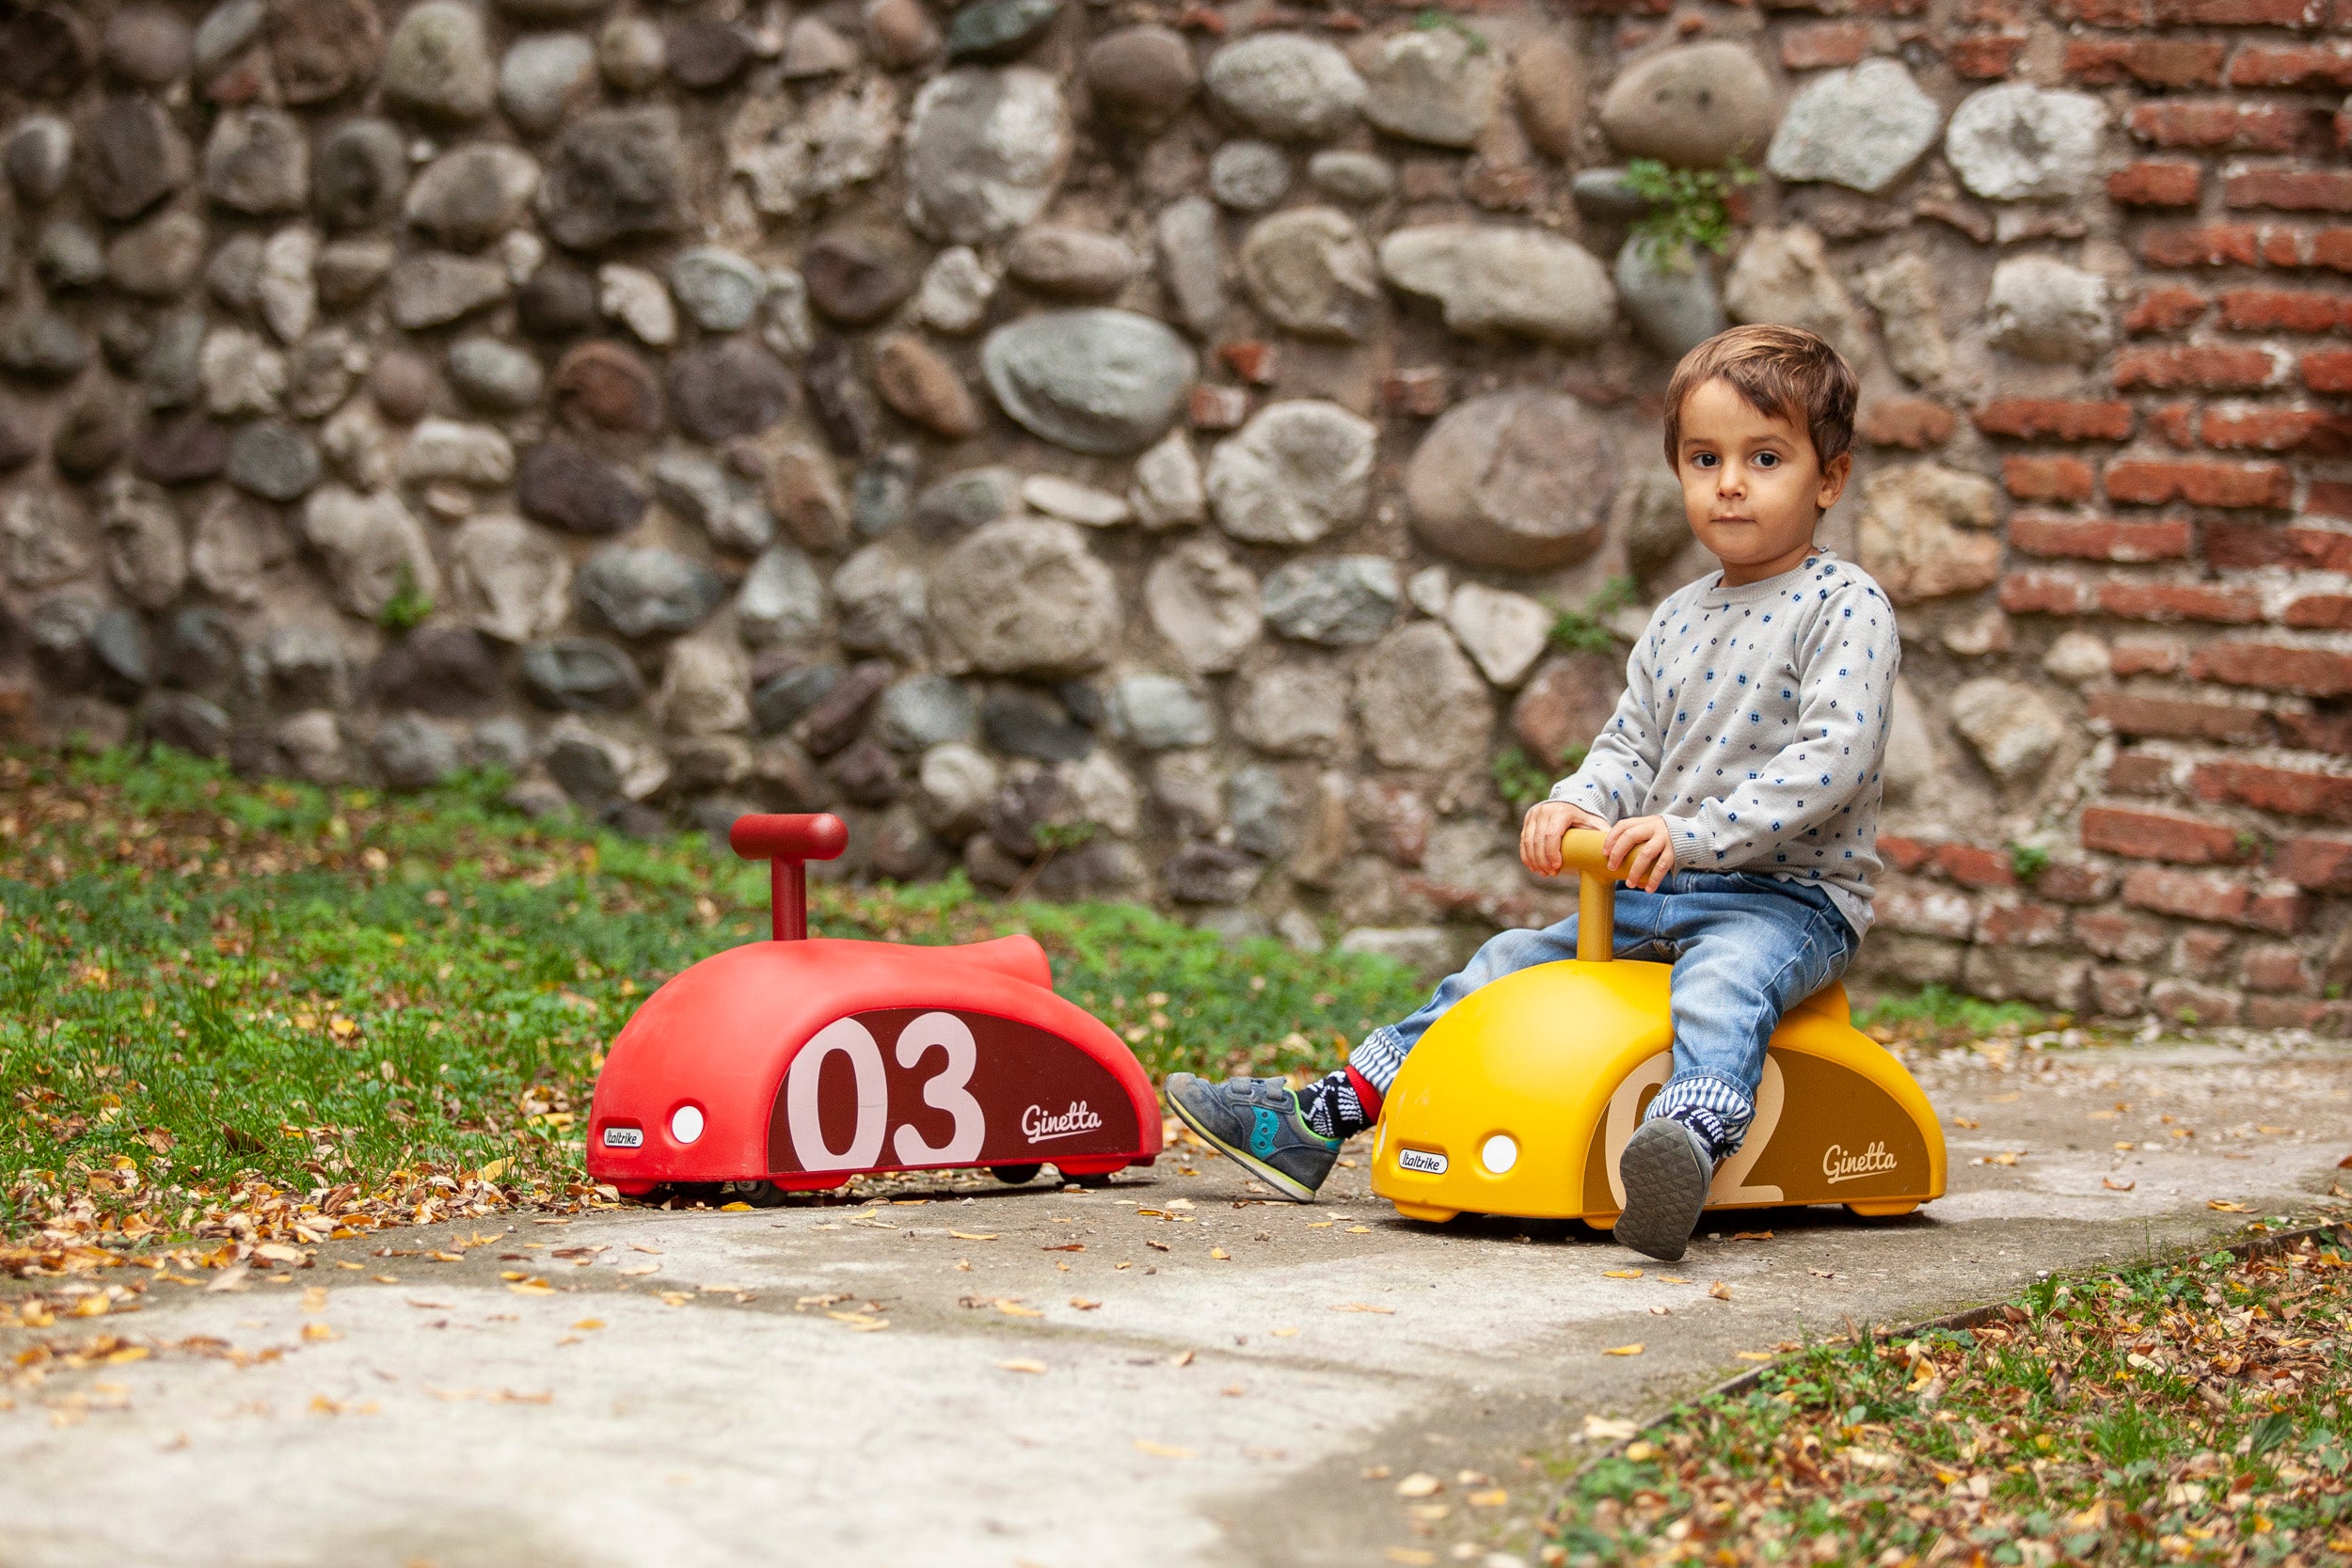 Ginetta Toddler Ride On Toy, Italtrike